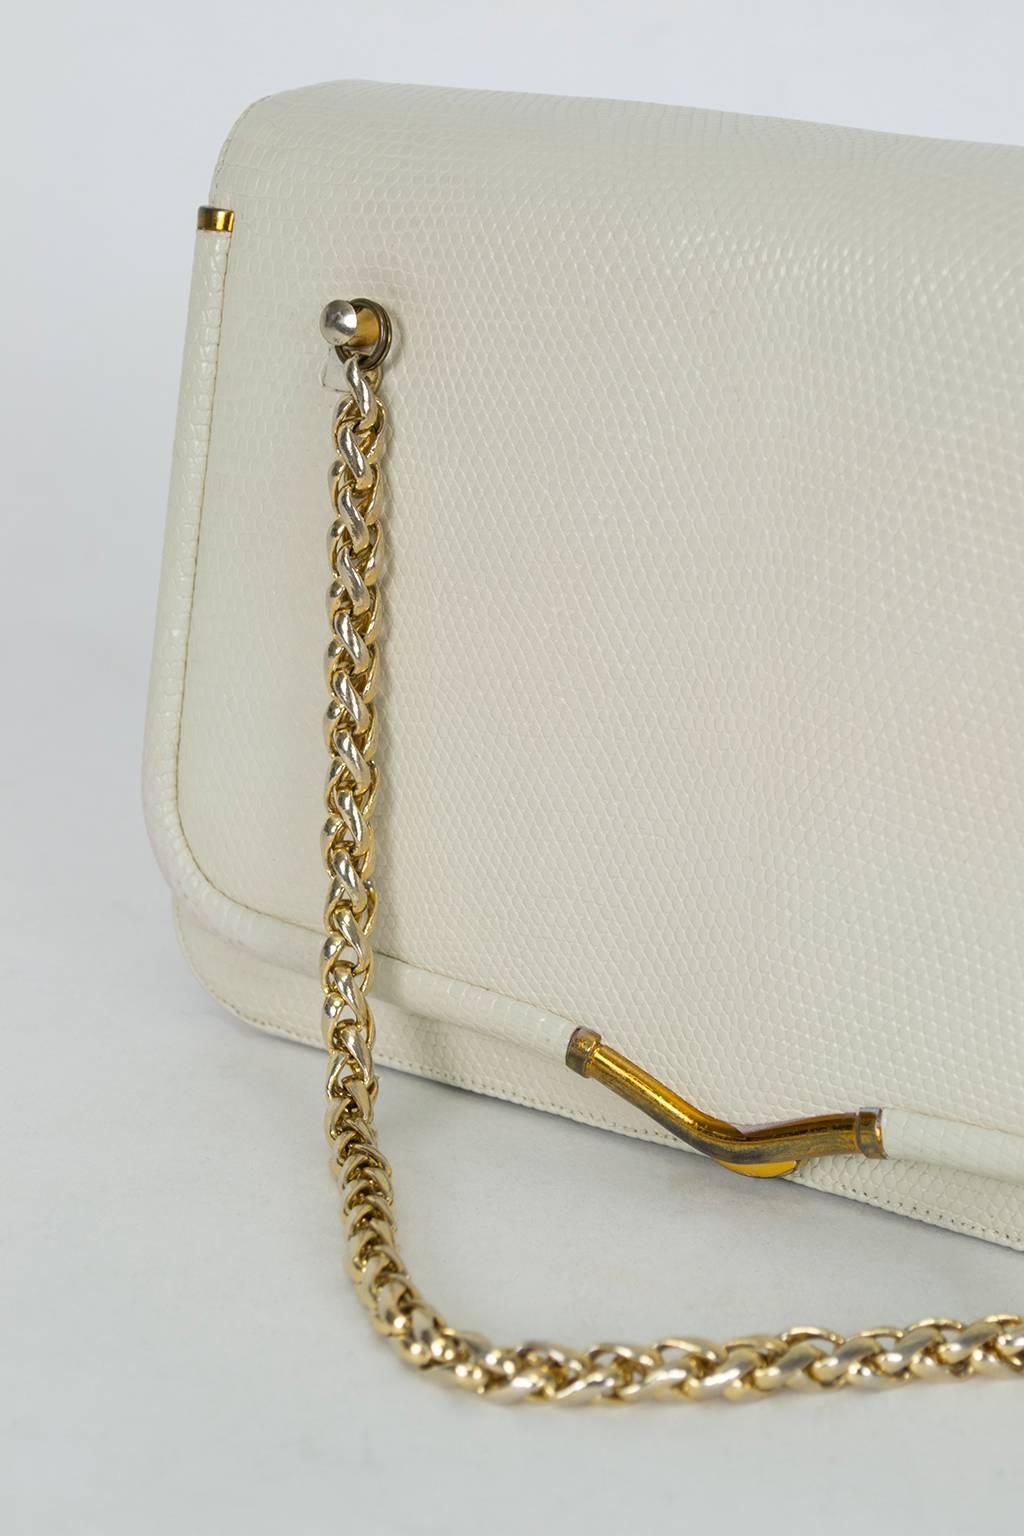 Women's Judith Leiber Ivory Lizard Compartment Purse with Gold Chain Handles, 1980s For Sale